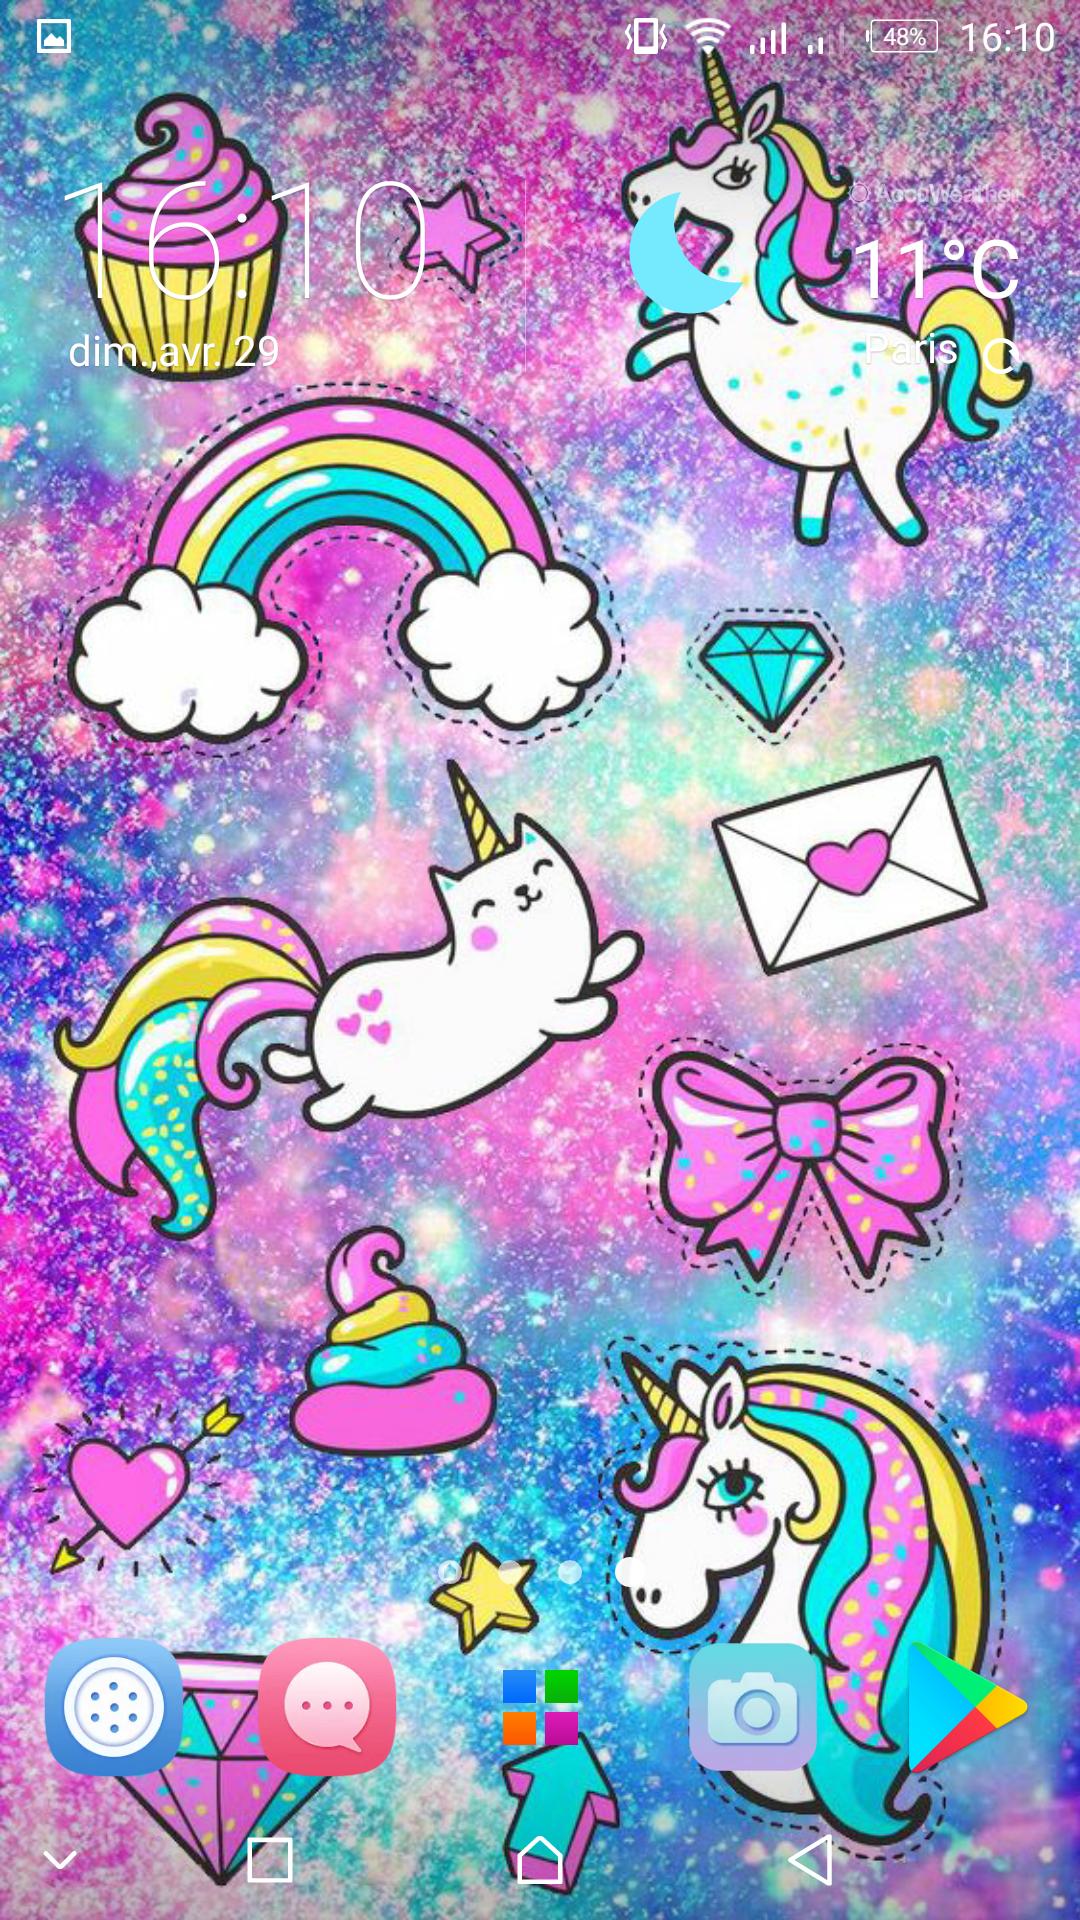 Girly cute backgrounds Kawaii wallpapers for Android   APK Download